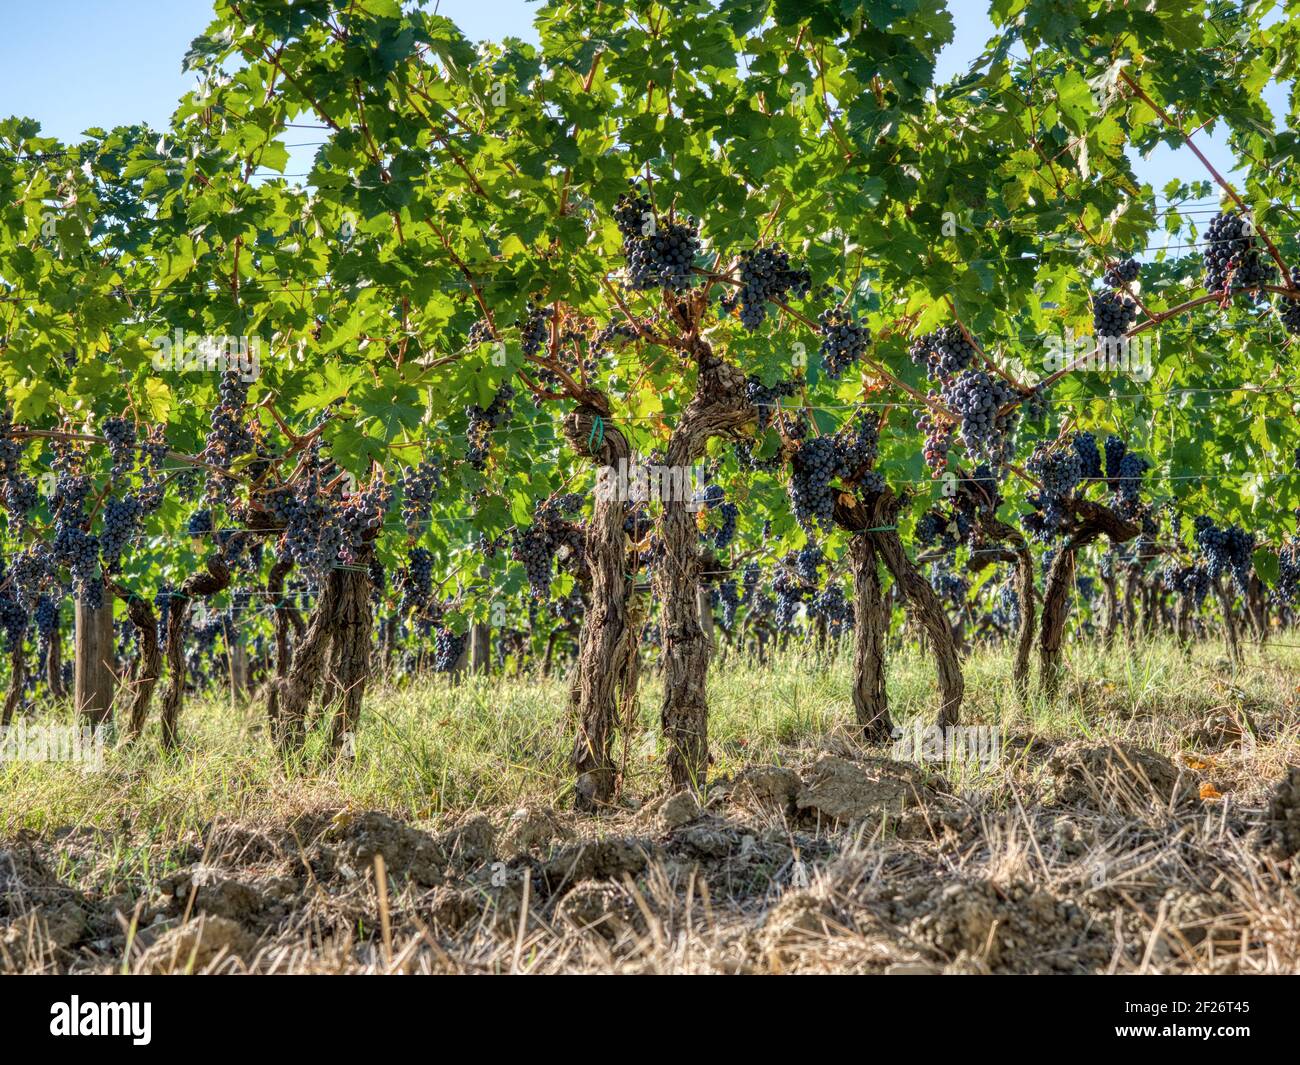 Vineyard on an oblique slope with ripe red grapes. Plantage,old gnarled trunks, sunny day with blue sky. In front was ploughed, meadow under the vines Stock Photo